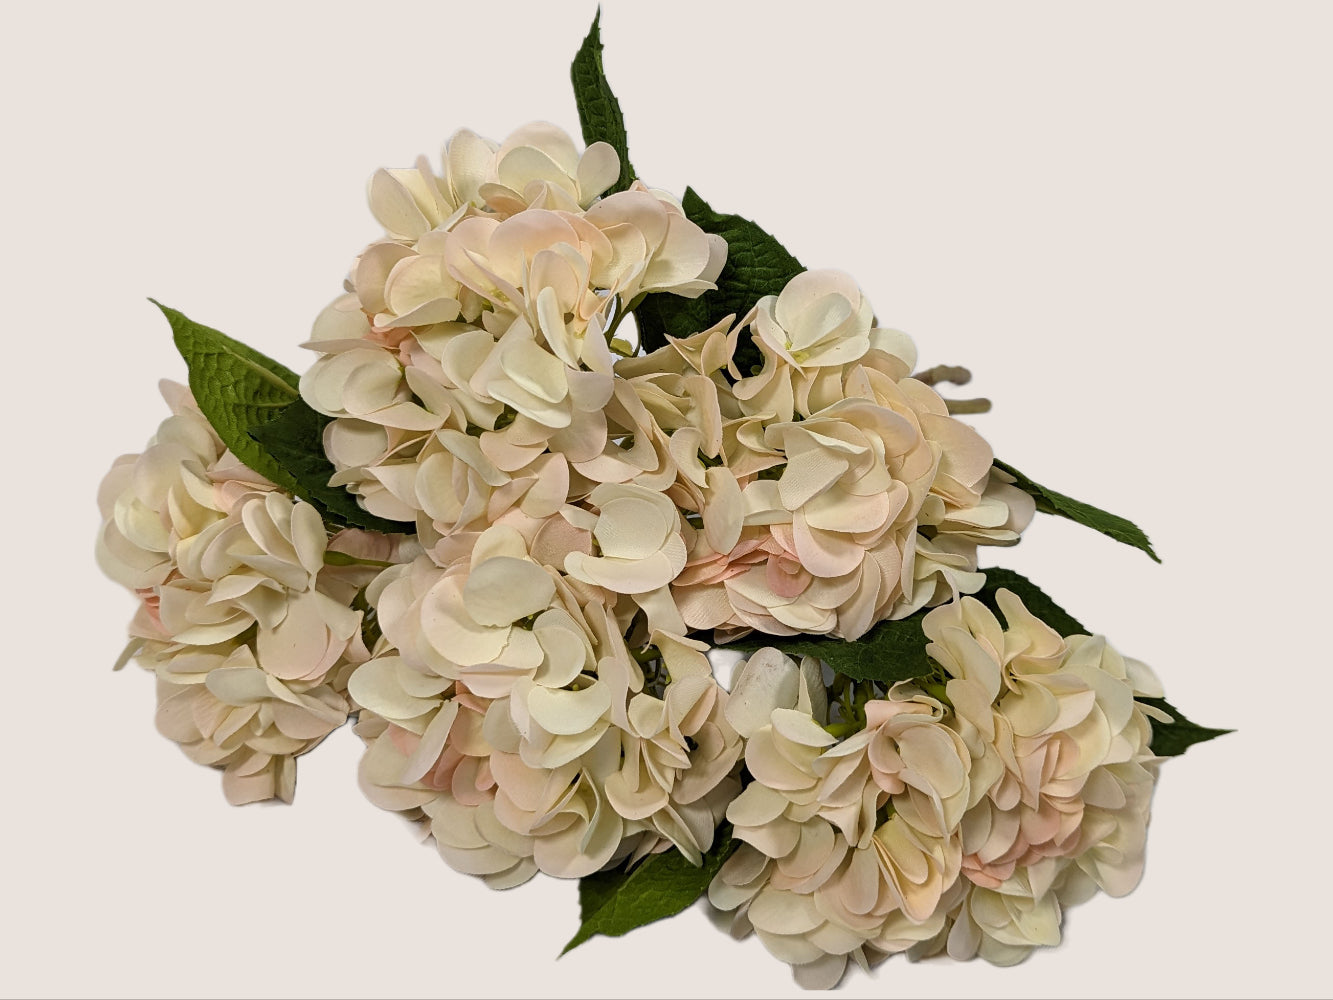 An image of a bouquet of artificial hydrangea flowers made with real touch materials that make it softer to the touch than traditional artificial flowers. The petals are creamy white with a faint soft pink on the tips of the petals, giving it a natural and delicate appearance. The stem has a color gradient including brown and green, adding to the realism of the flower. The image provides a close-up view of the flower, allowing the viewer to appreciate the intricate details of the petals and stem.